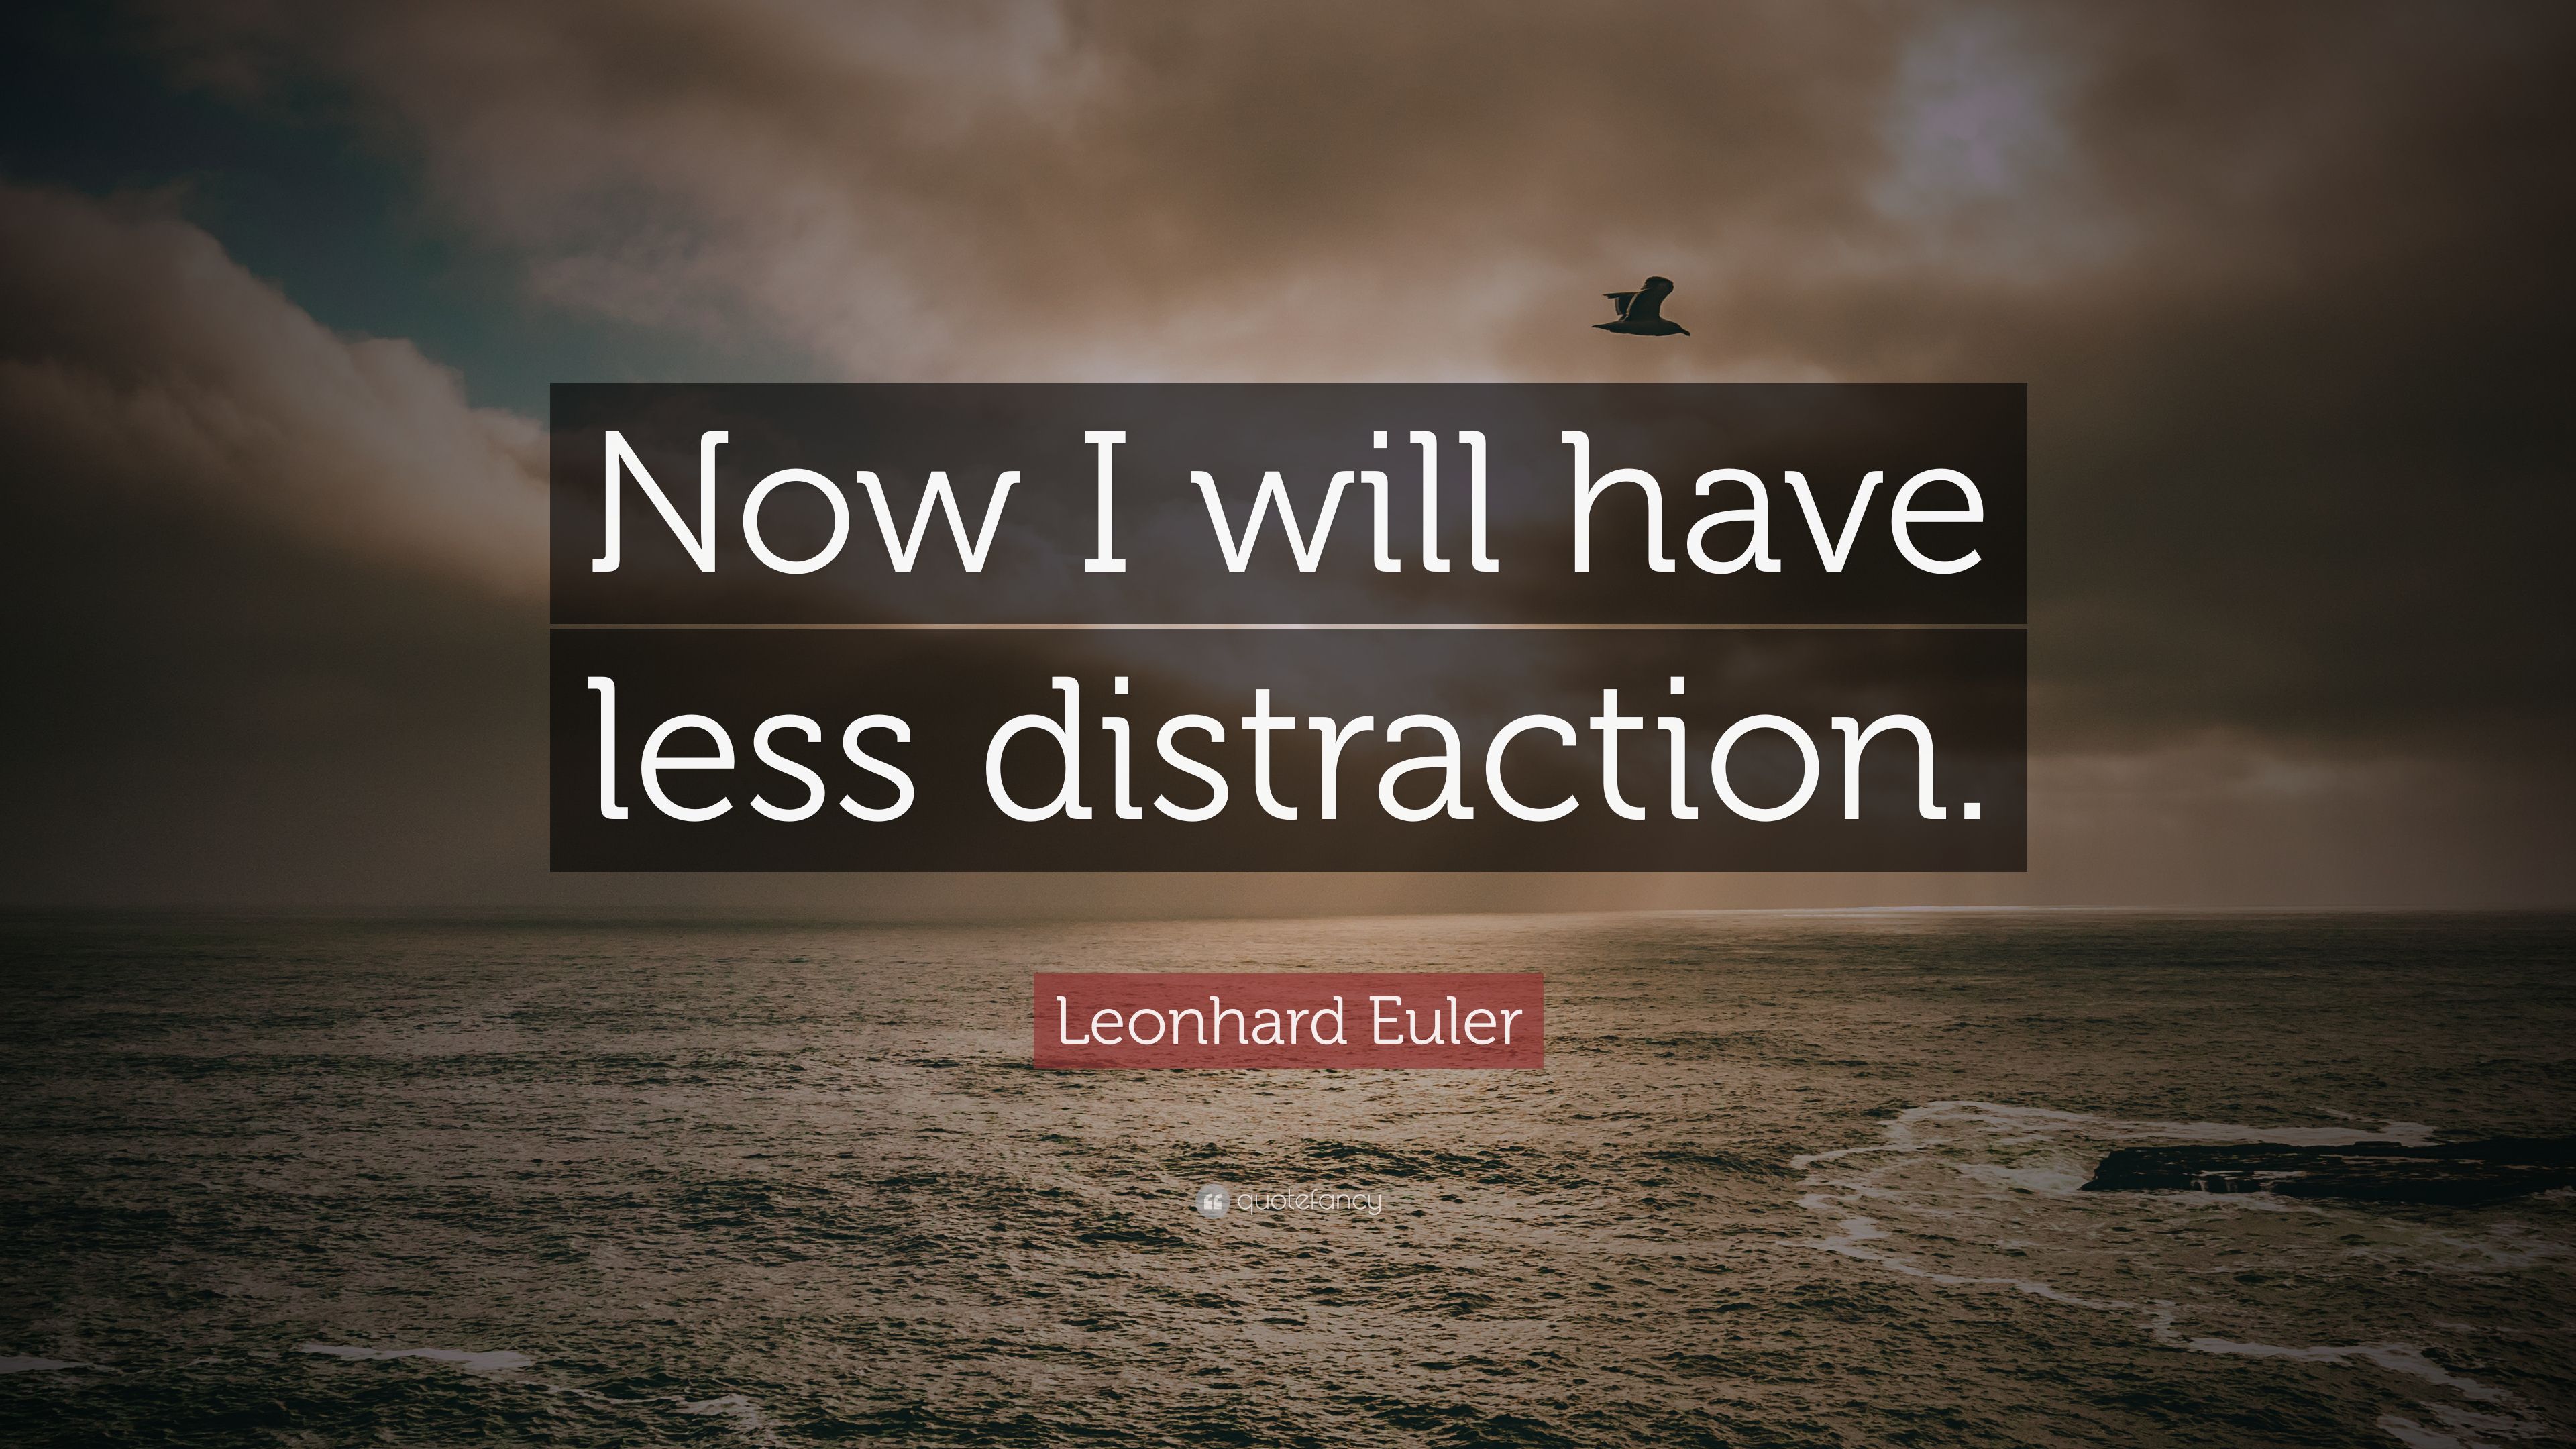 Leonhard Euler Quote: “Now I will have less distraction.” (7 wallpaper)